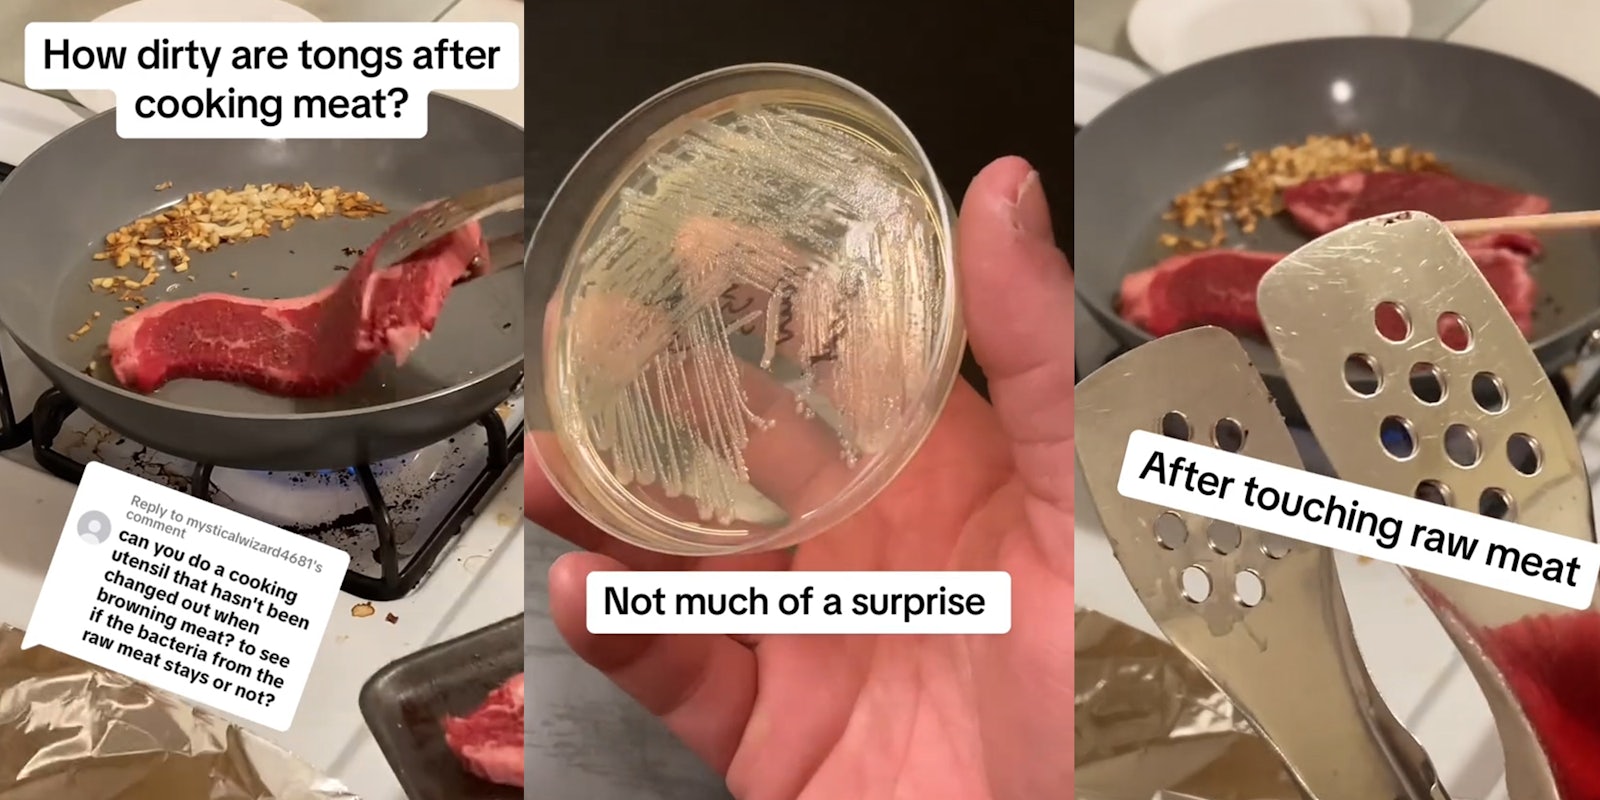 Person shares whether you should be changing tongs out after flipping raw meat